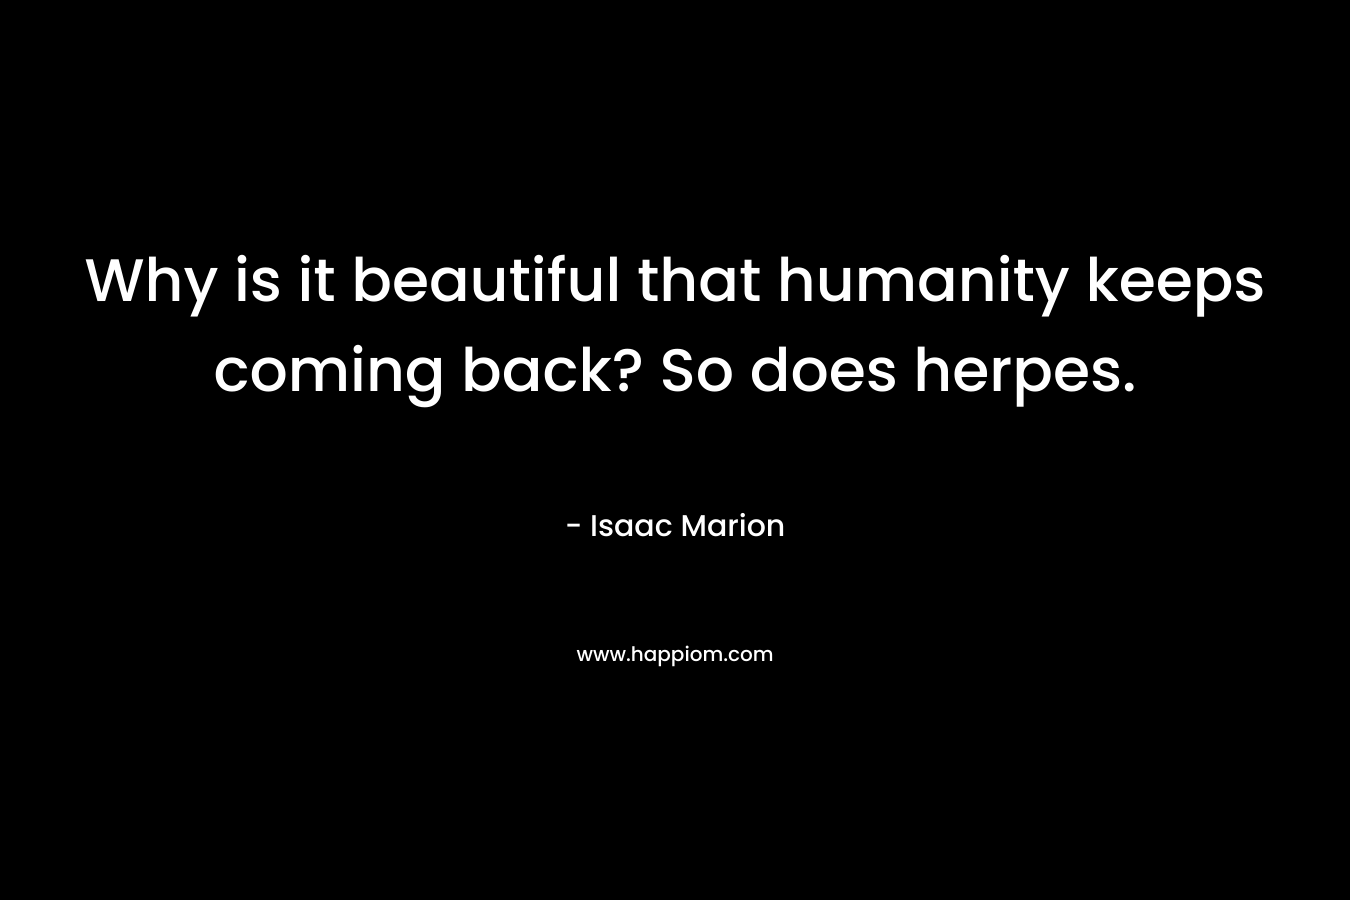 Why is it beautiful that humanity keeps coming back? So does herpes. – Isaac Marion